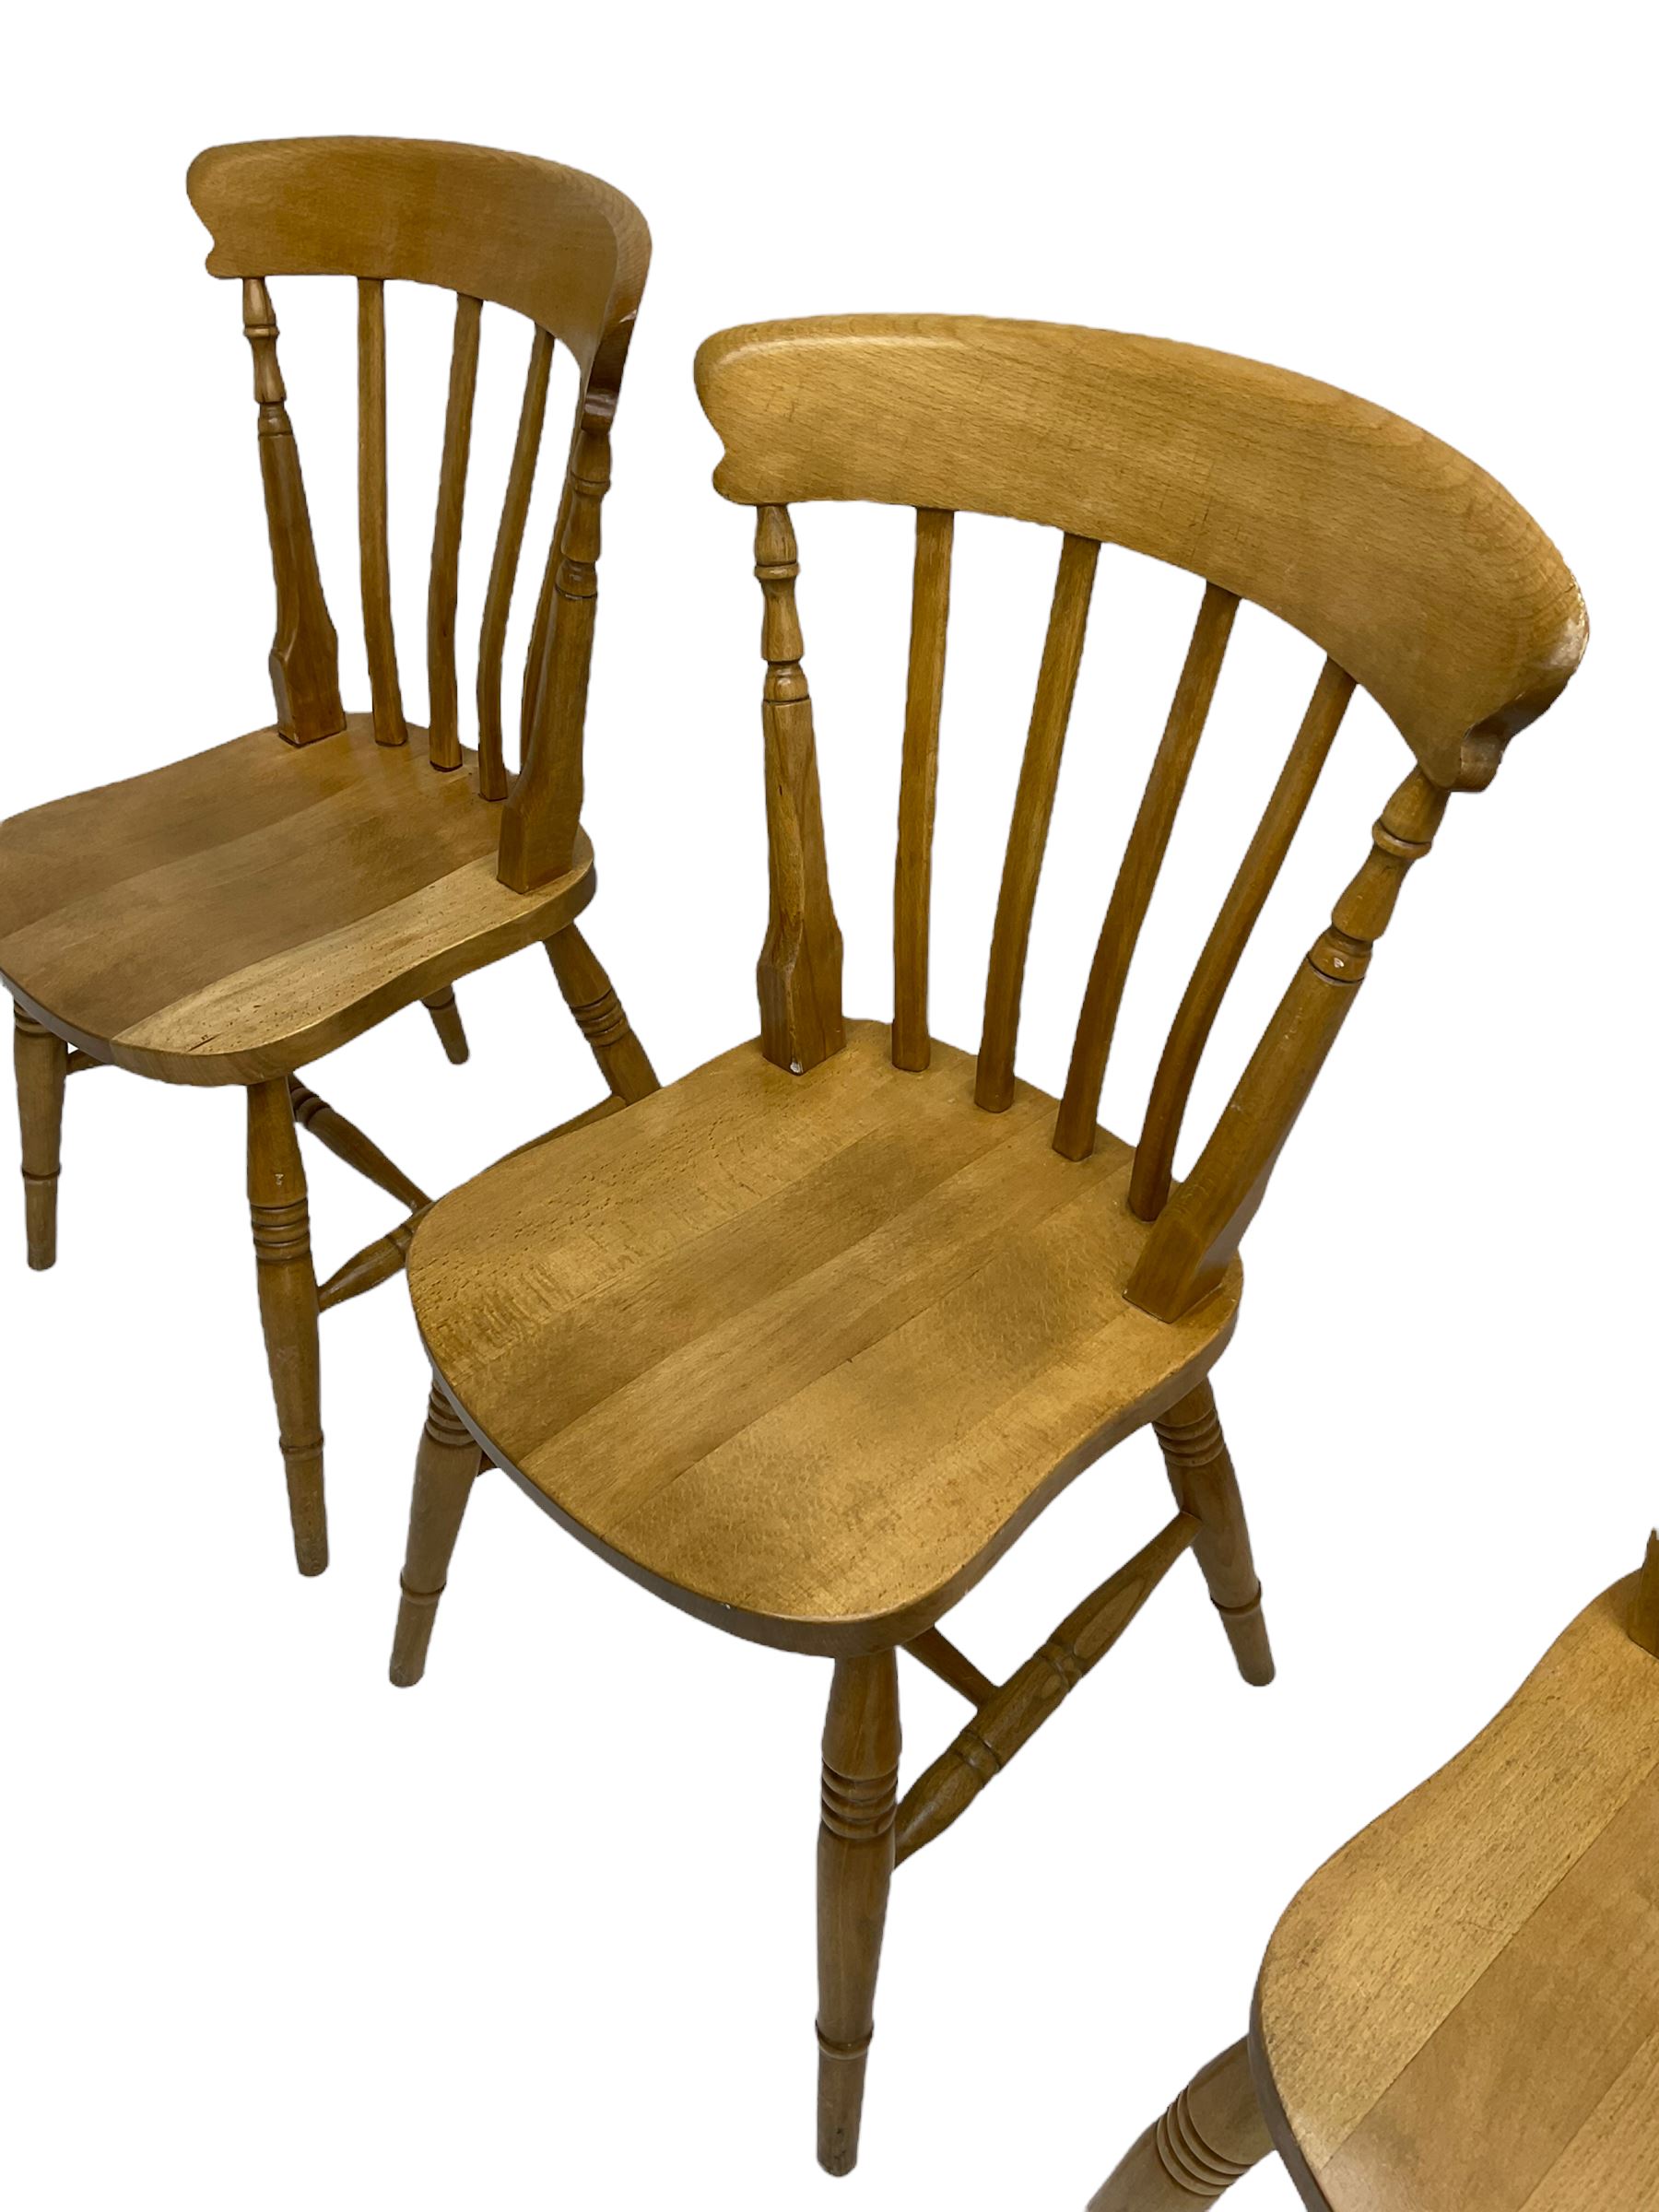 Four beech farmhouse chairs - Image 2 of 4